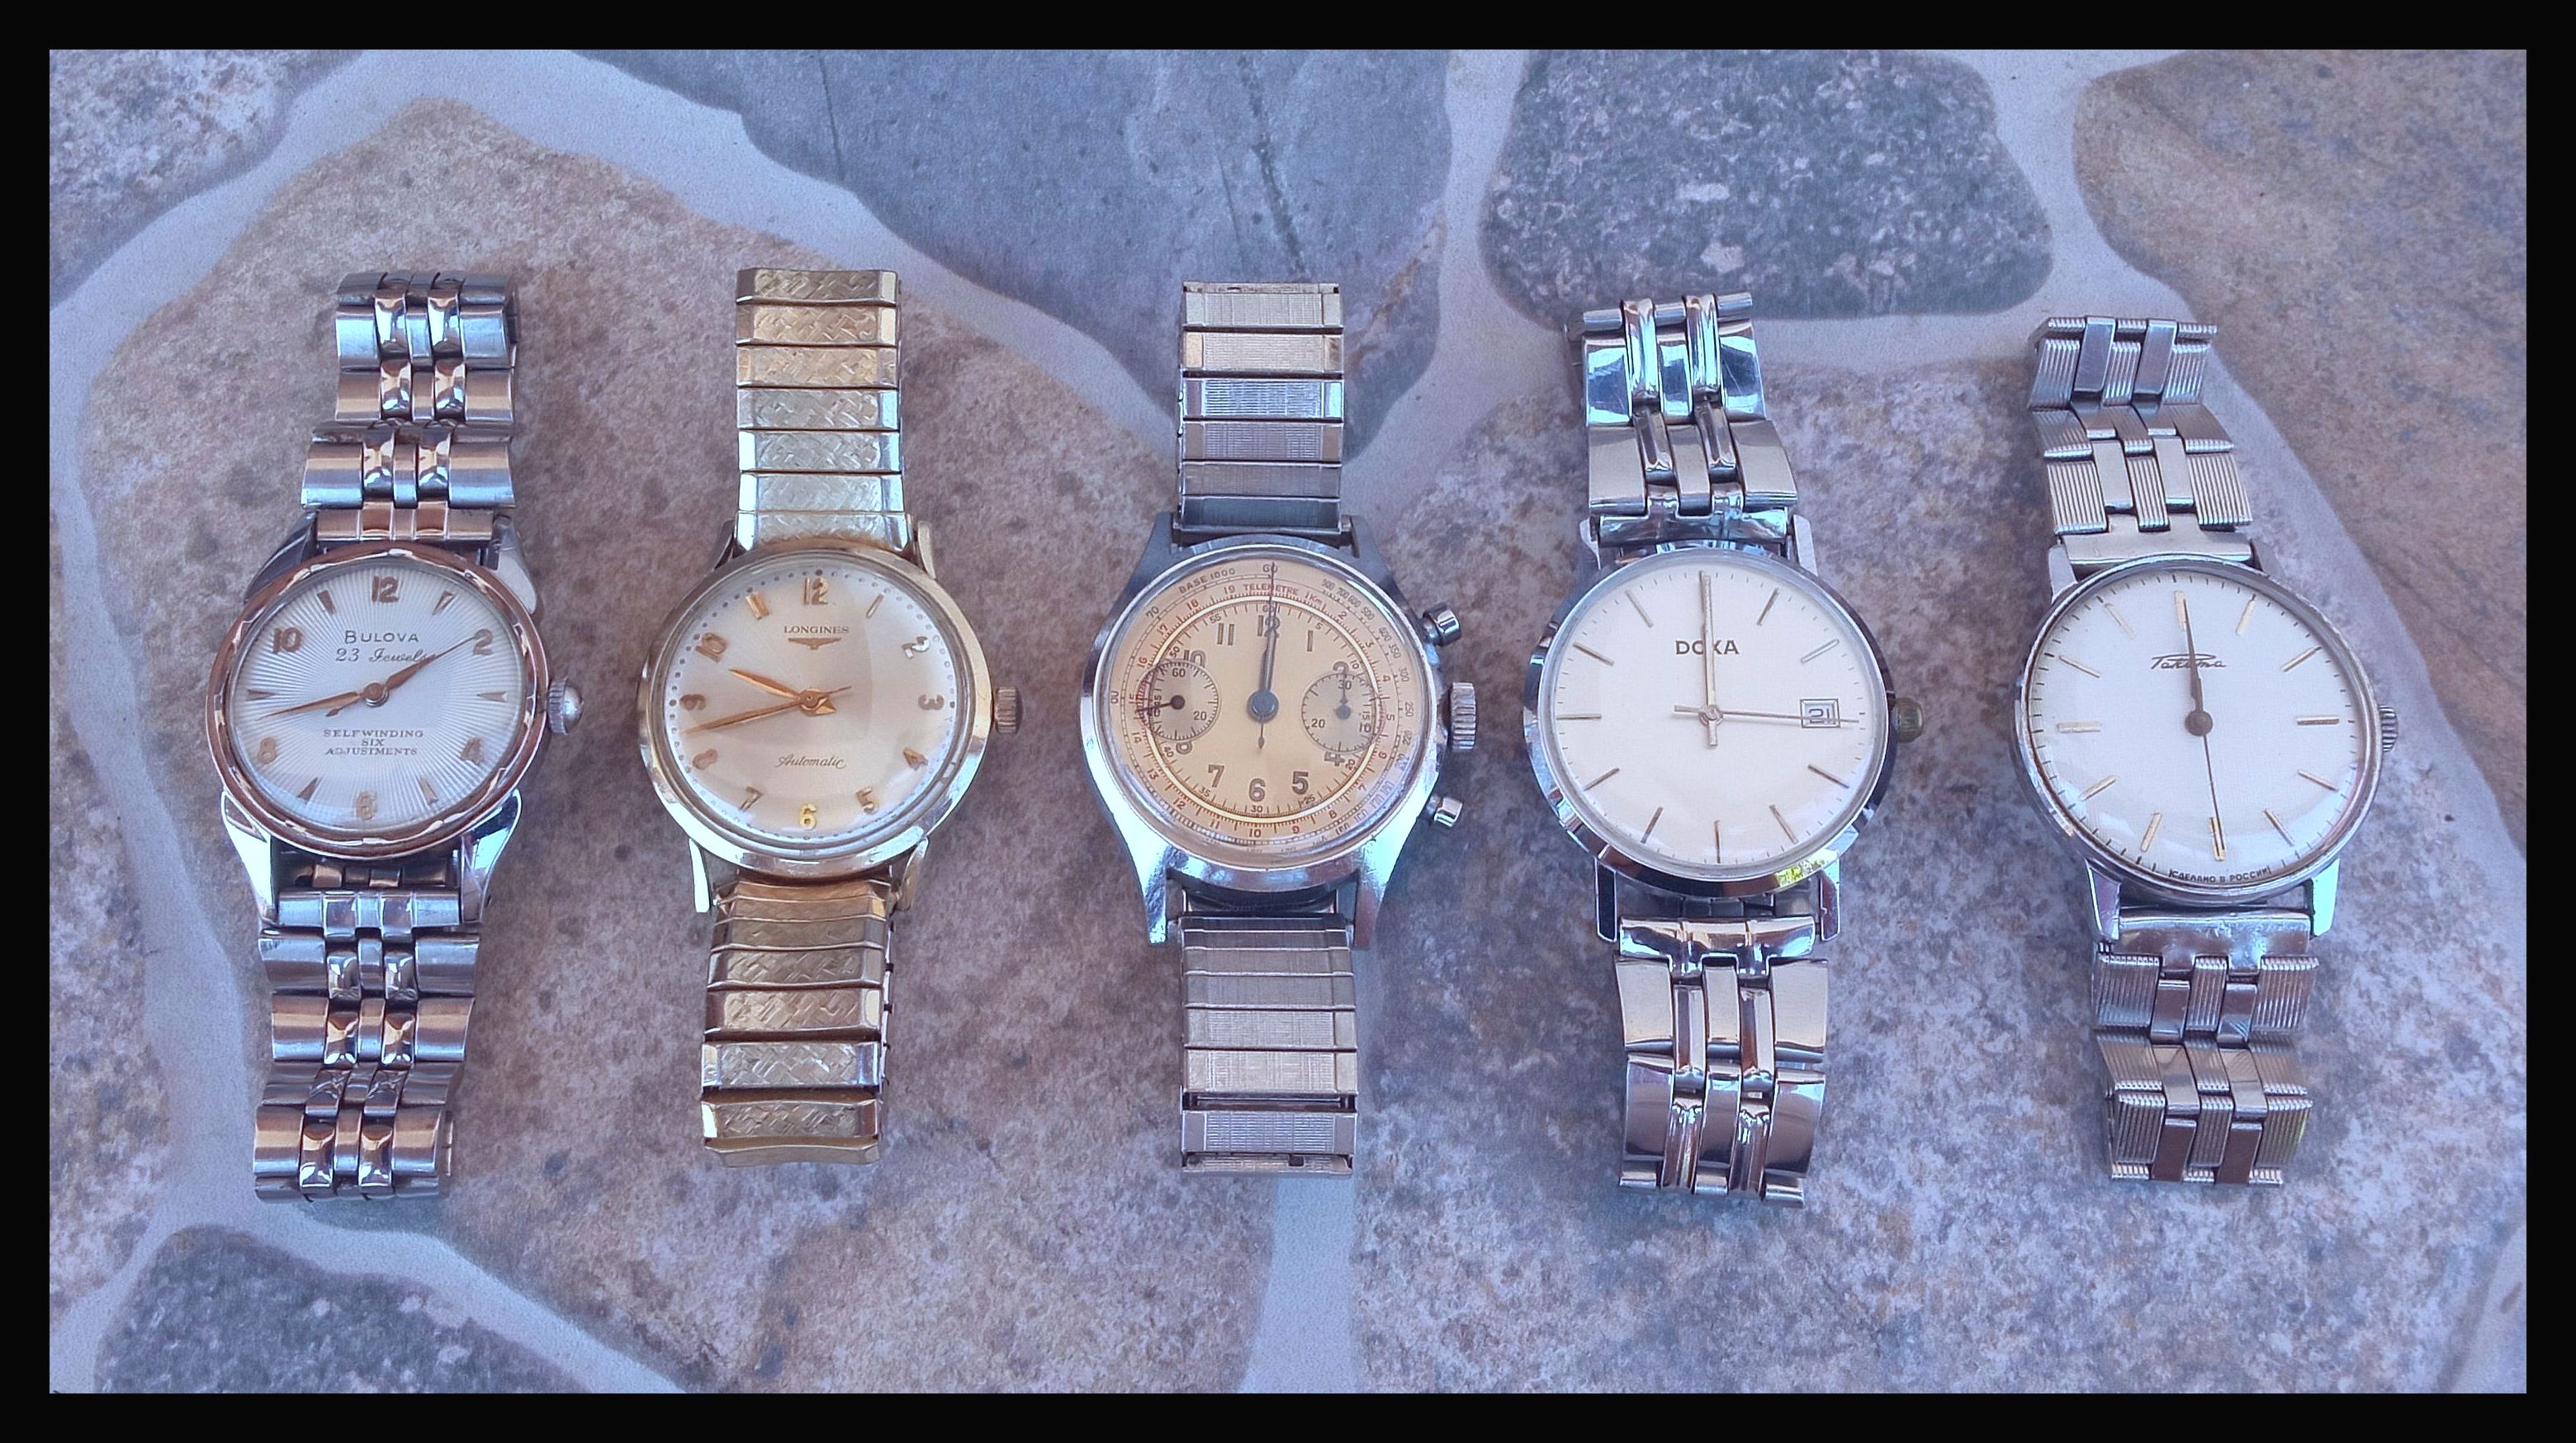 Watch collection 01.jpg